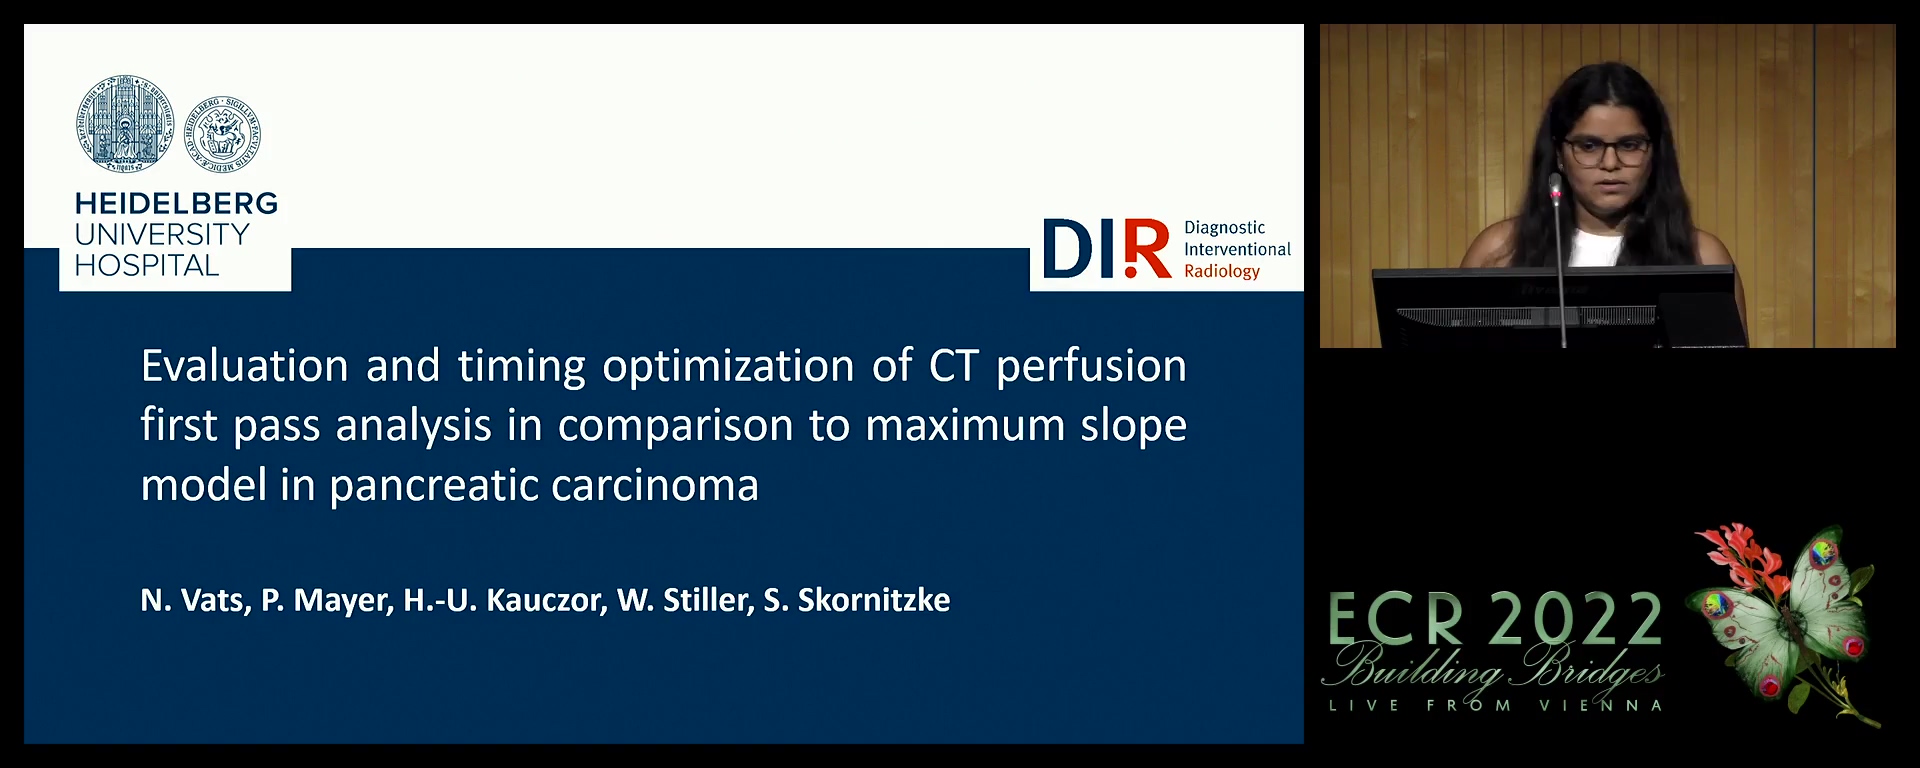 Evaluation and timing optimisation of CT perfusion first pass analysis in comparison to maximum slope model in pancreatic carcinoma - Neha Vats, Heidelberg / DE